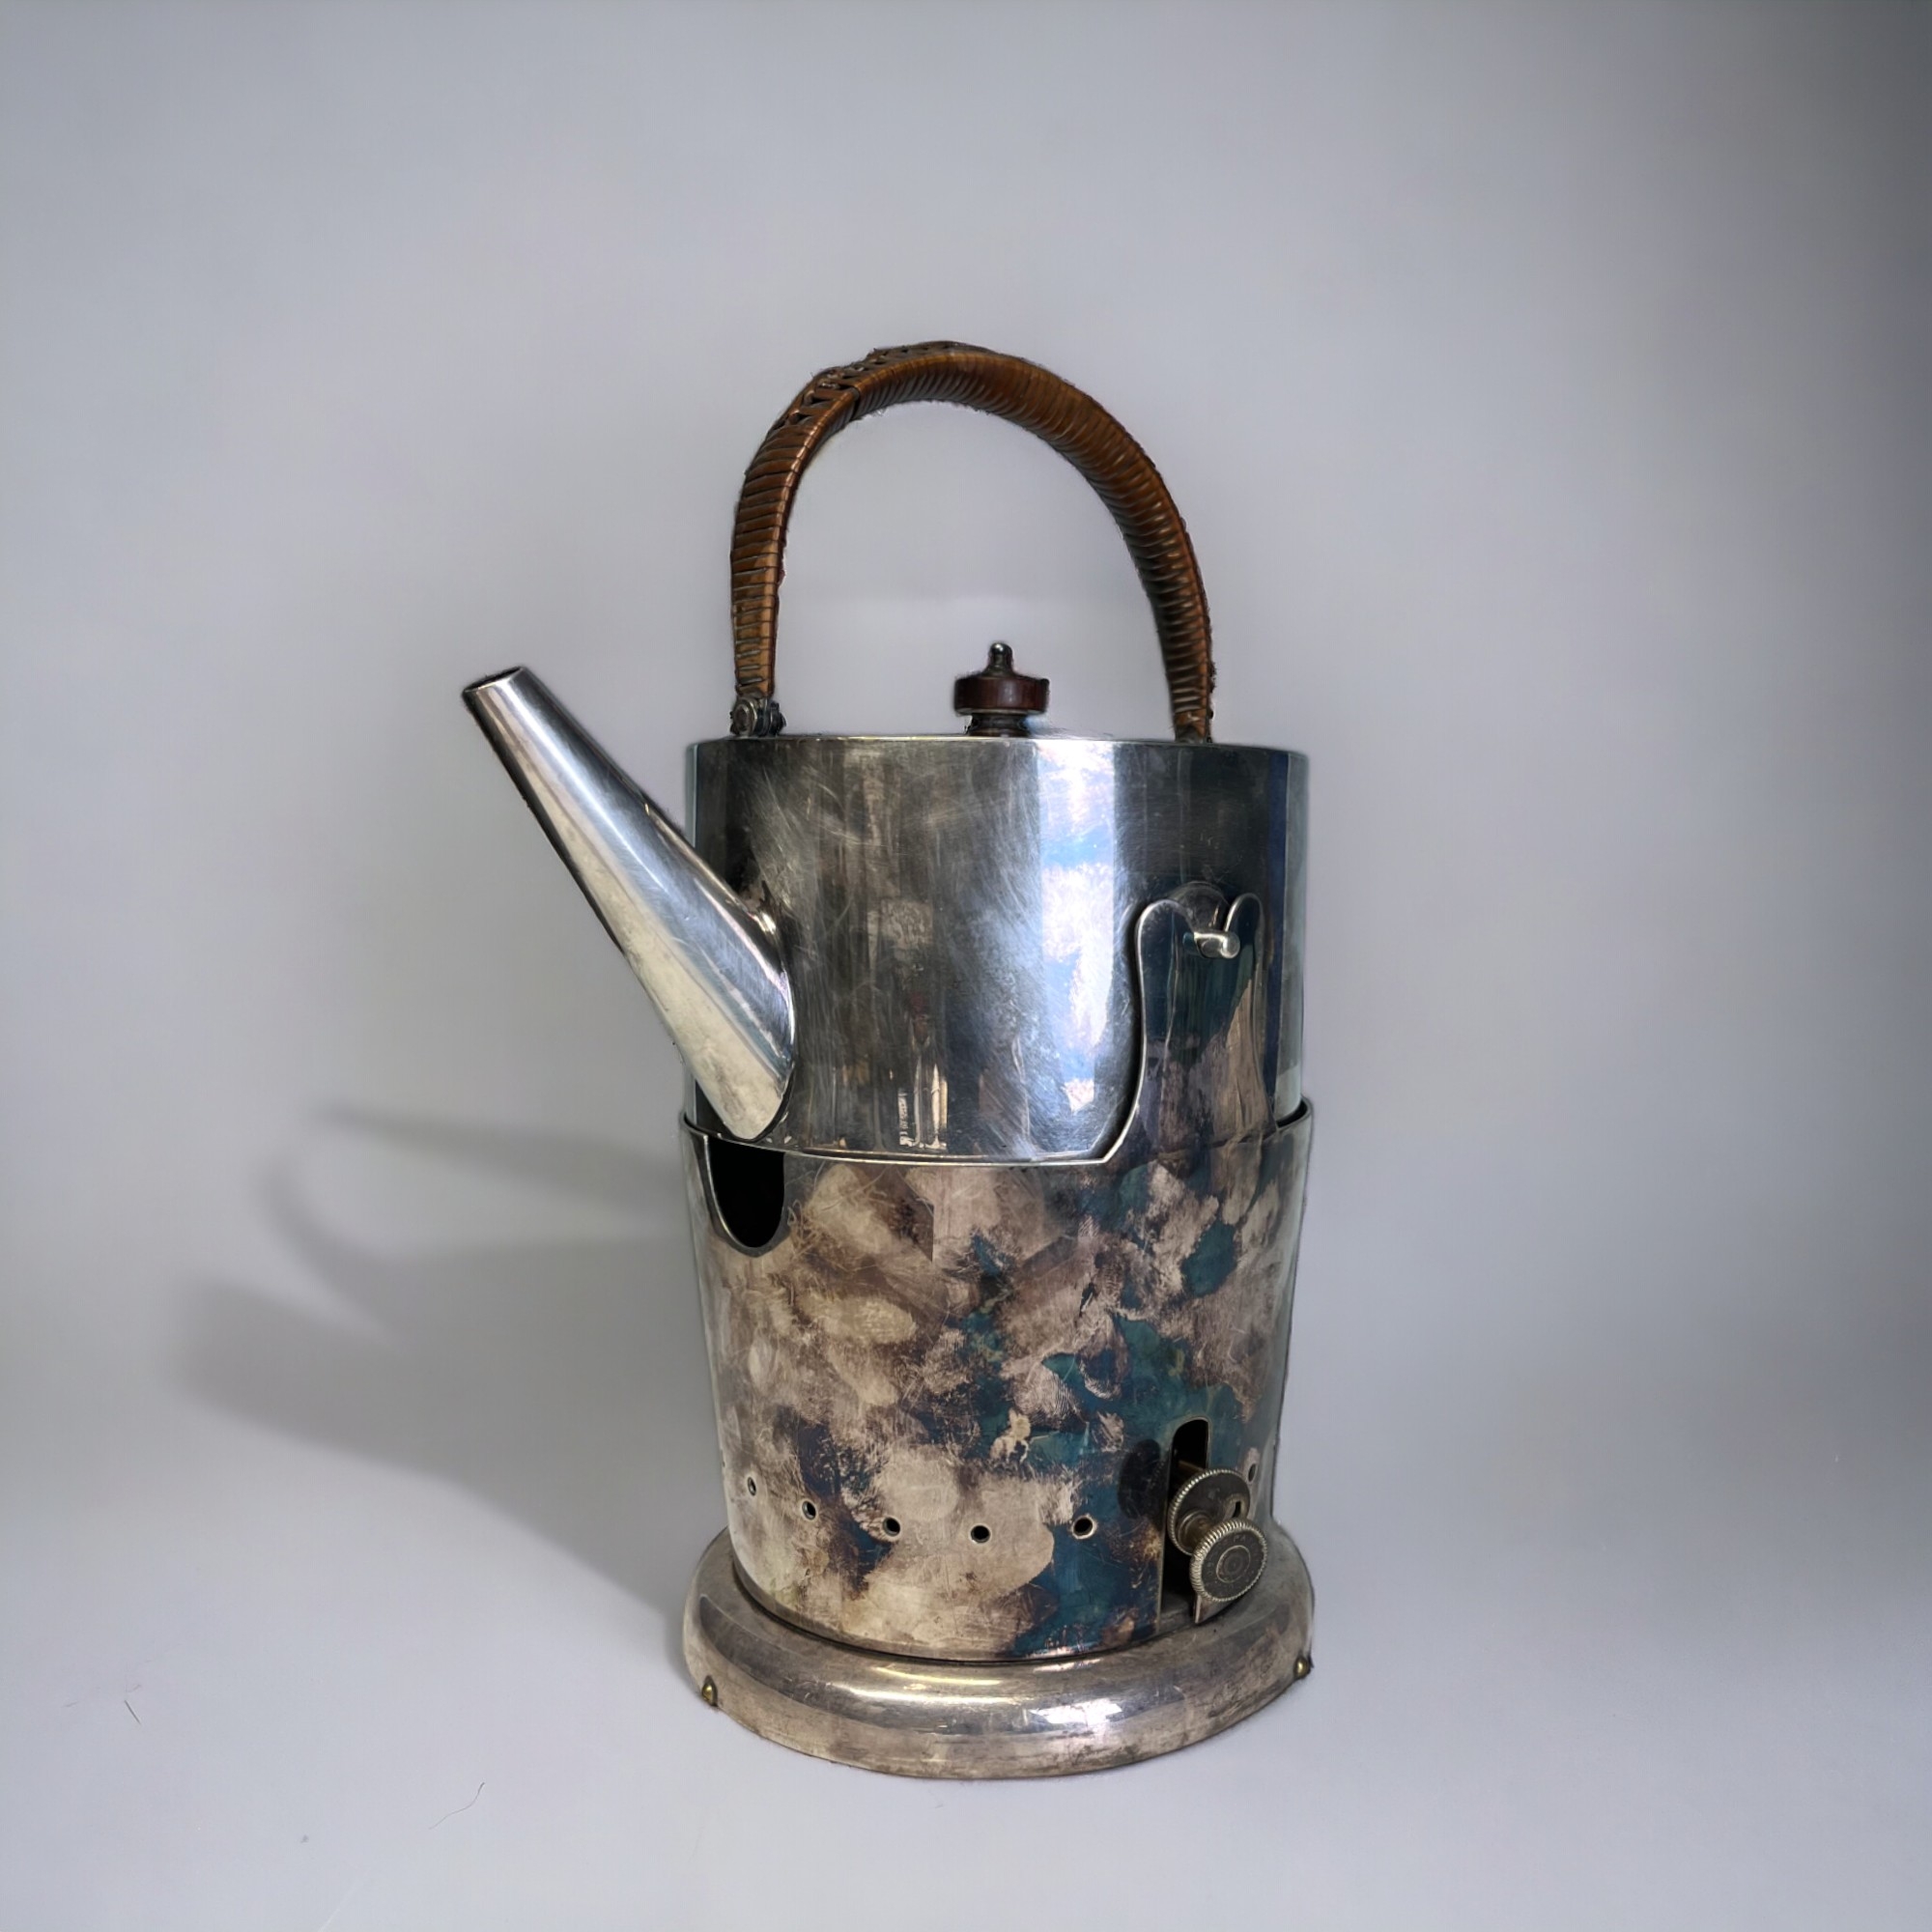 A VICTORIAN ELECTROPLATE KETTLE WITH WARMER. By Stephenson & son. Christopher Dresser style